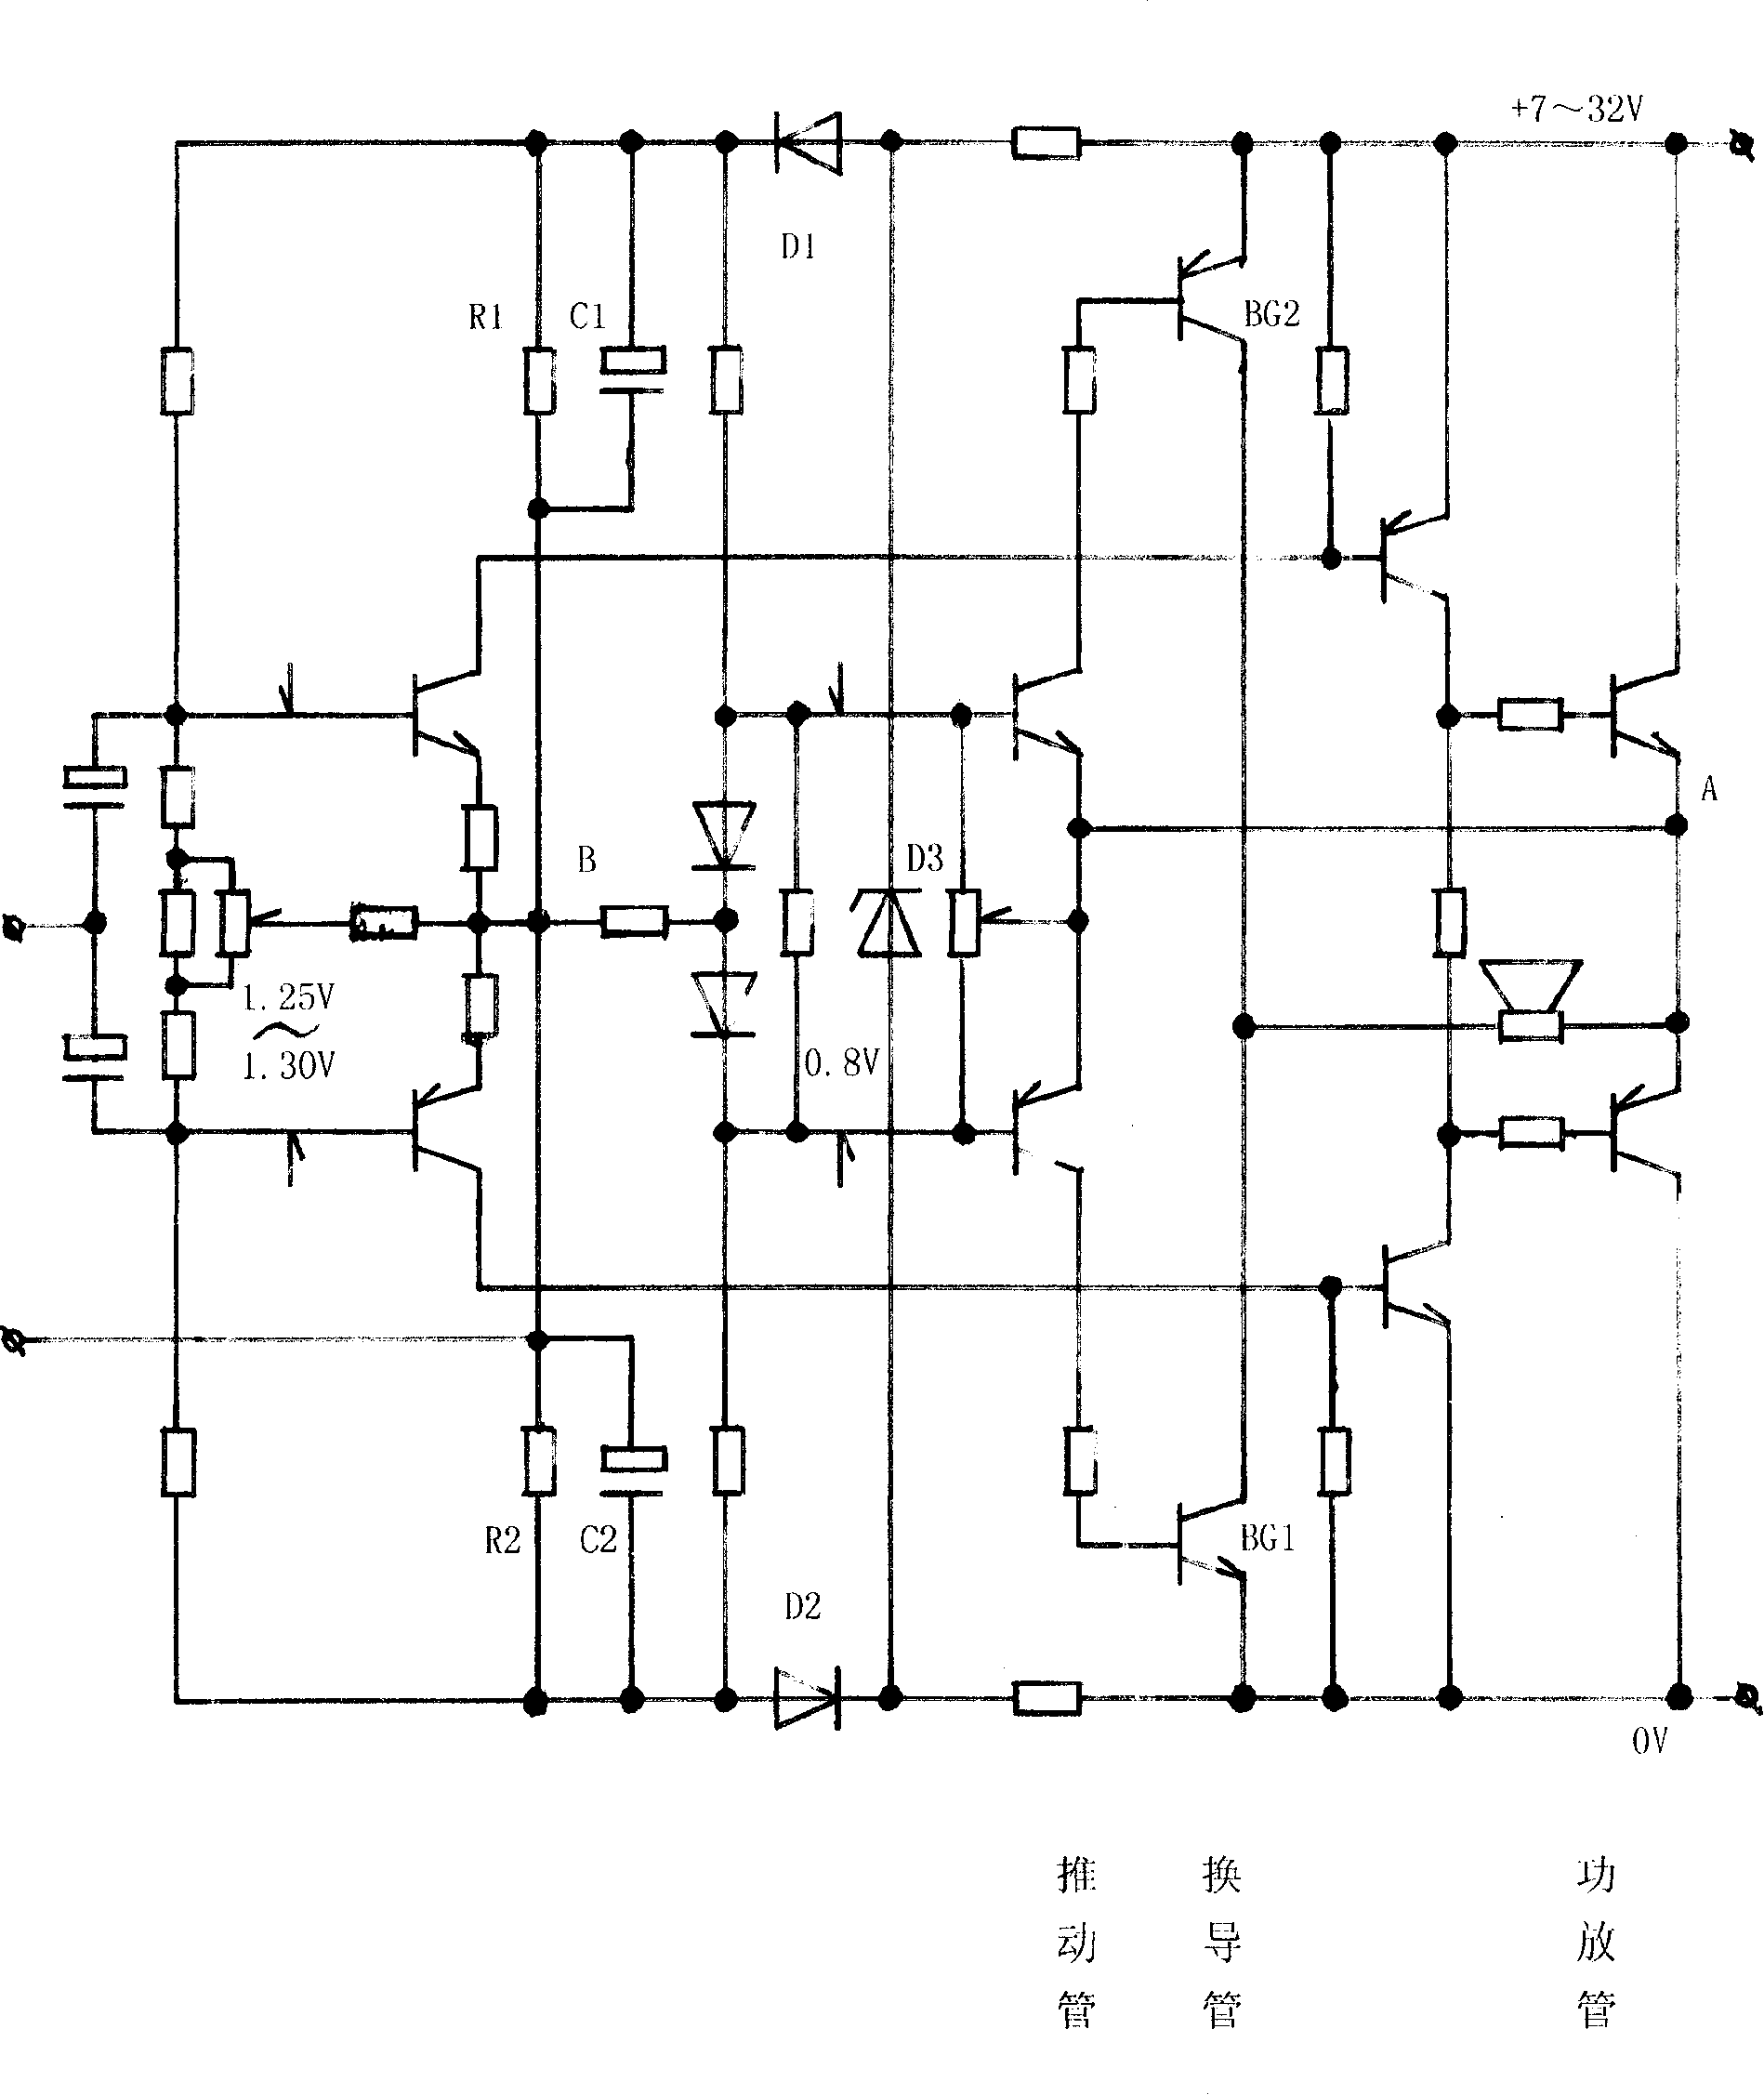 Guide changing type symmetrical power amplifier